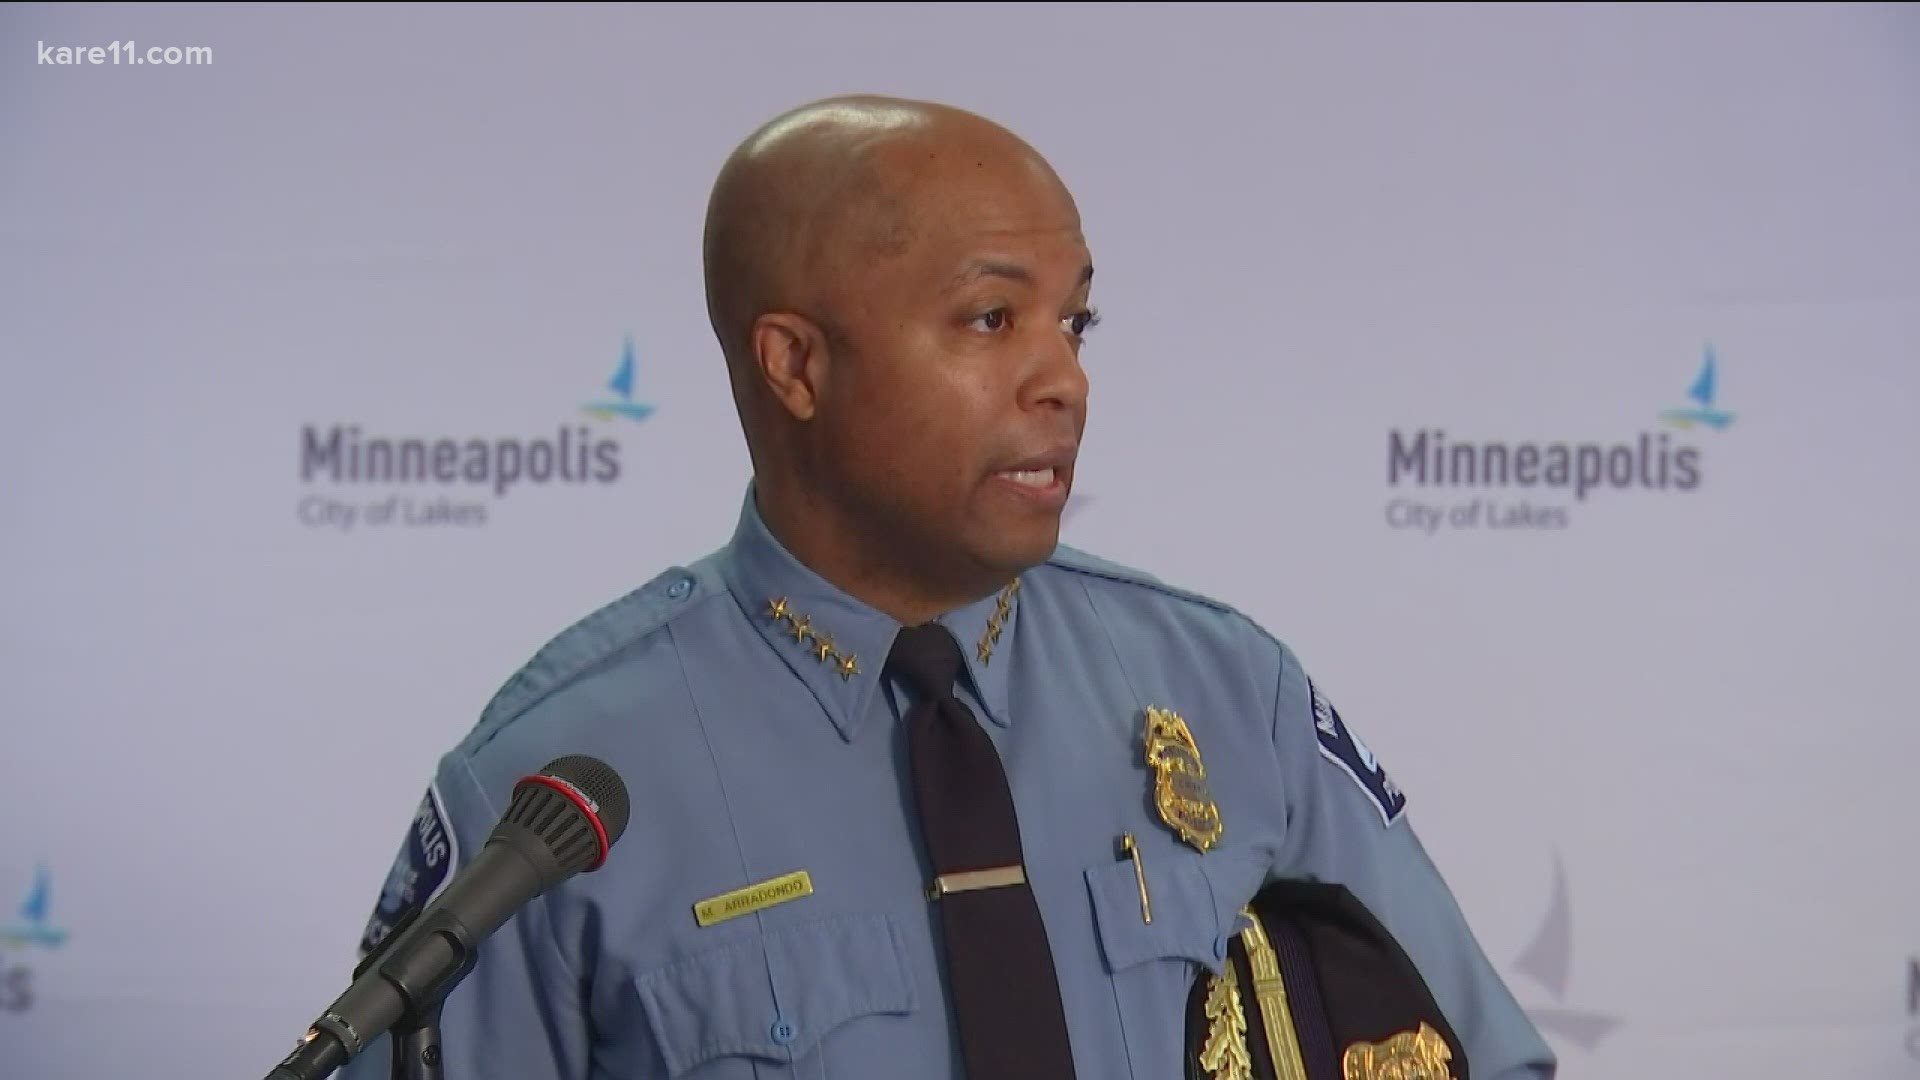 "The case has already been submitted to our internal affairs division," said Minneapolis Mayor Jacob Frey. "There is an investigation that is already underway."